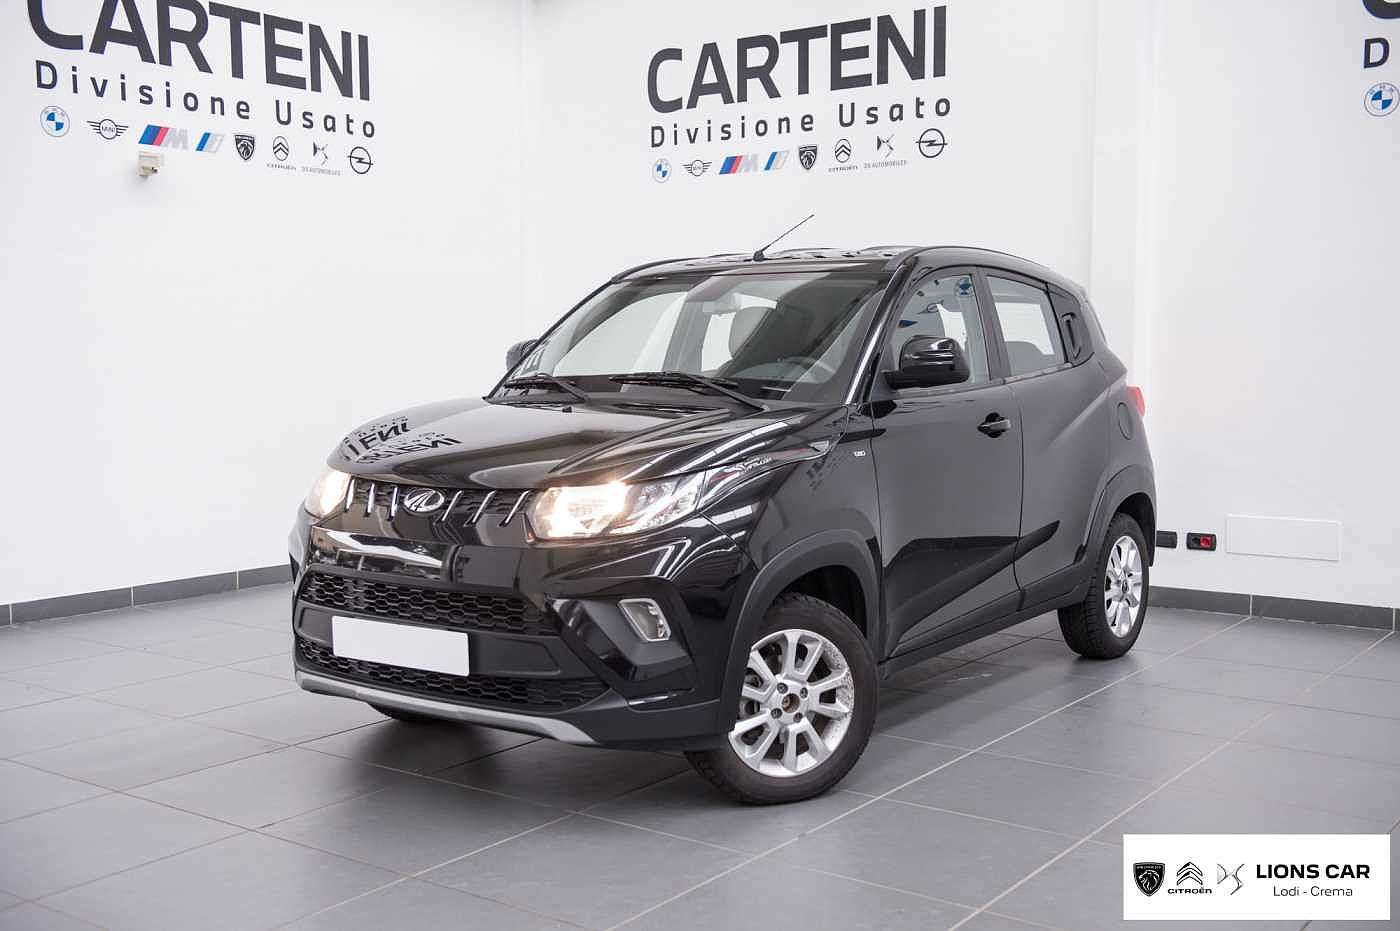 Mahindra KUV100 Off-Road/Pick-up in Black used in Lodi - Lo for € 10,500.-